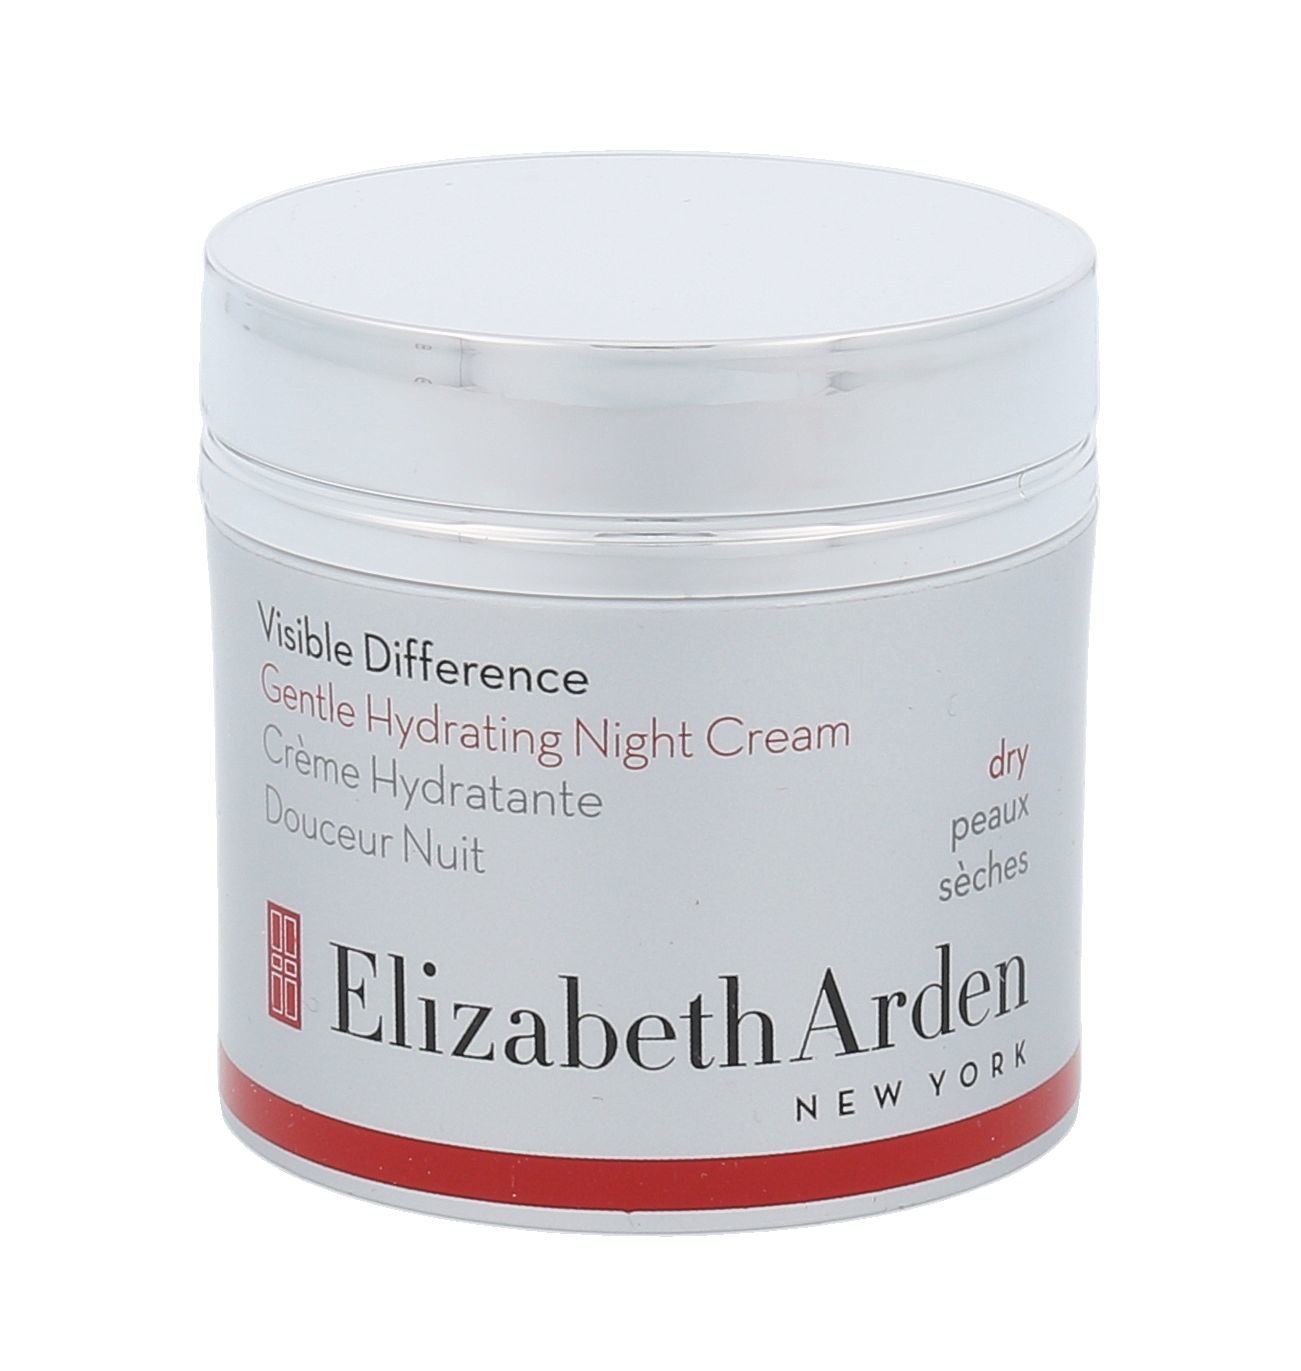 Elizabeth Arden Visible Difference Gentle Hydrating Night Cream